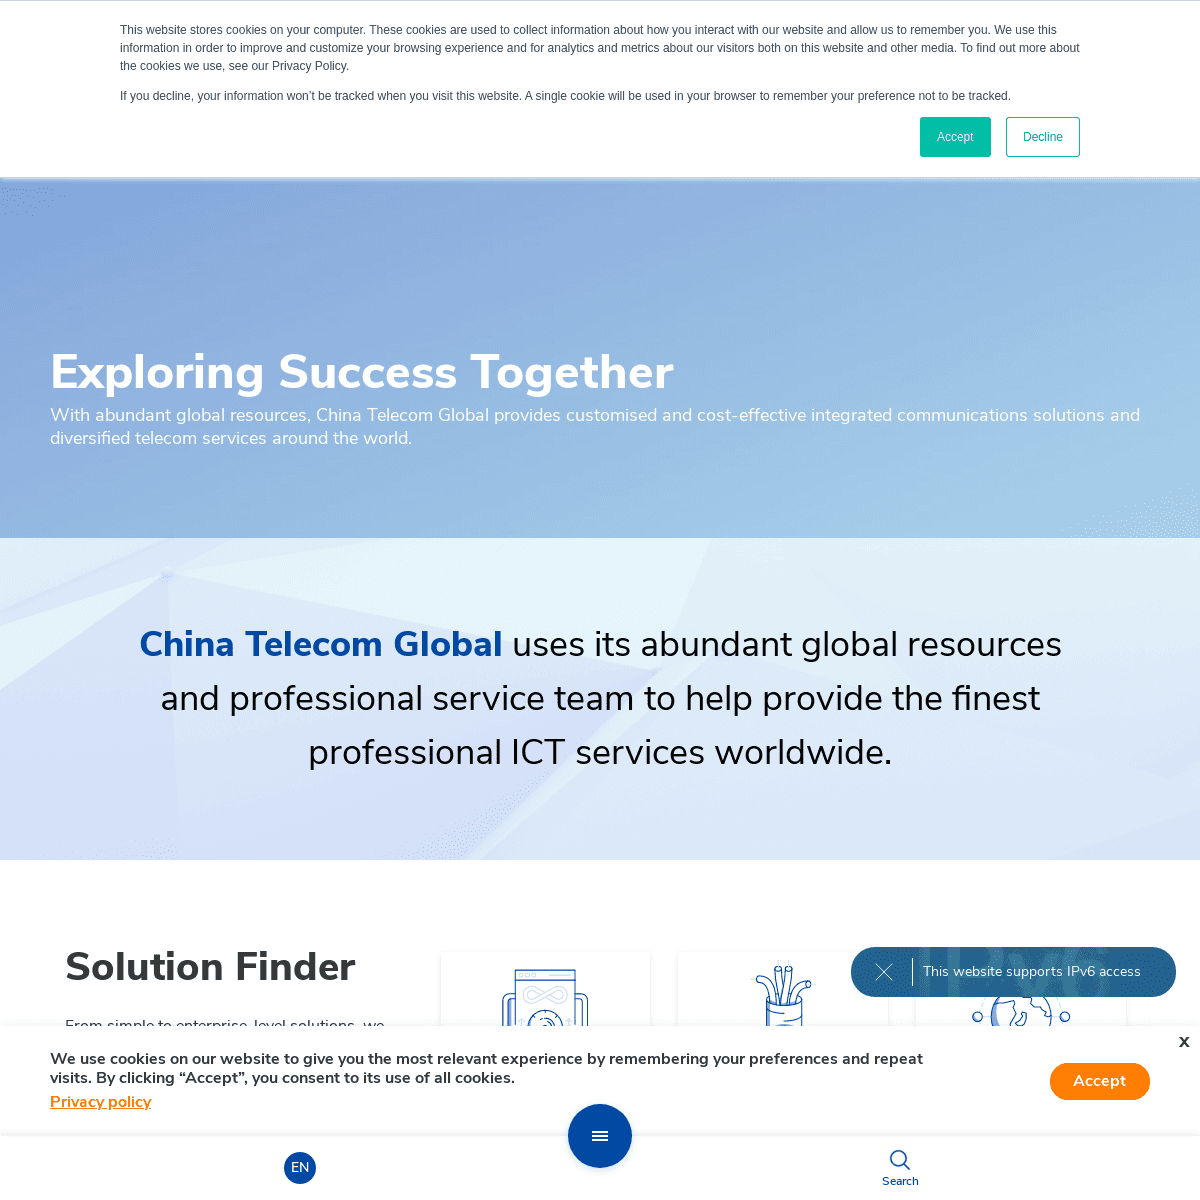 A complete backup of https://chinatelecomglobal.com